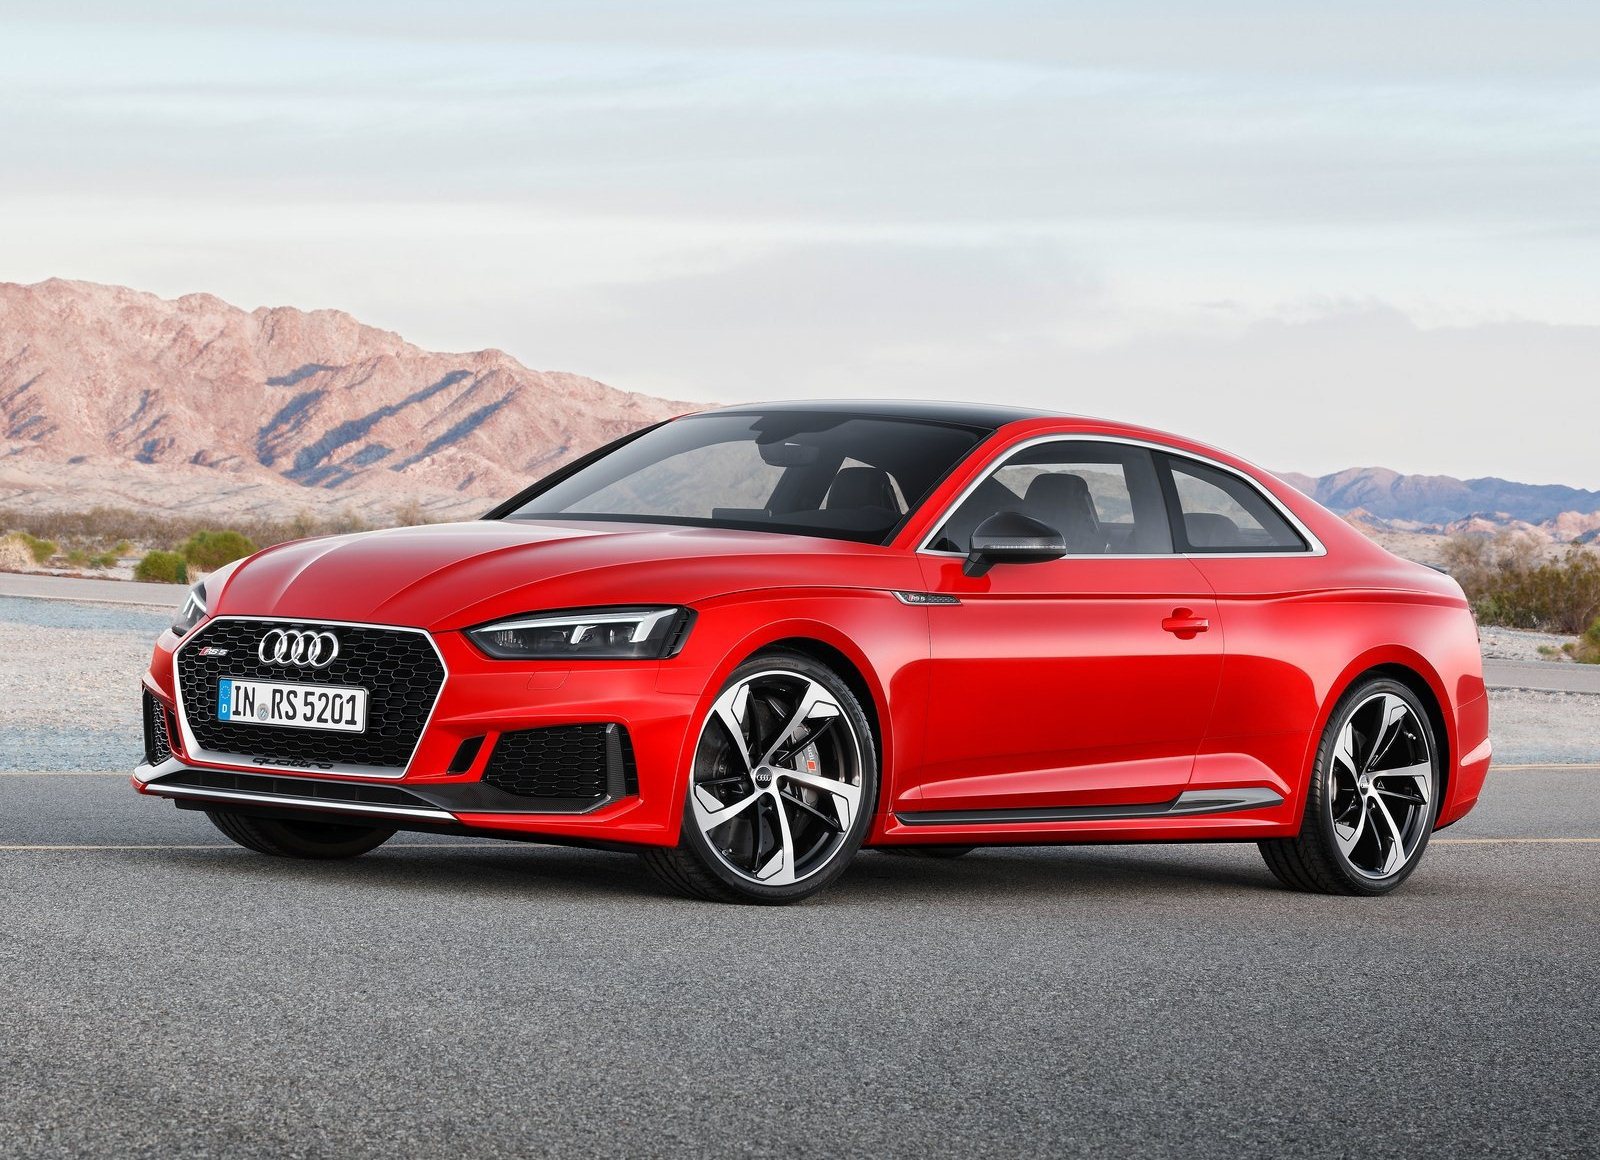 Rs5 Wallpaper - 2018 Audi Rs5 Price South Africa , HD Wallpaper & Backgrounds